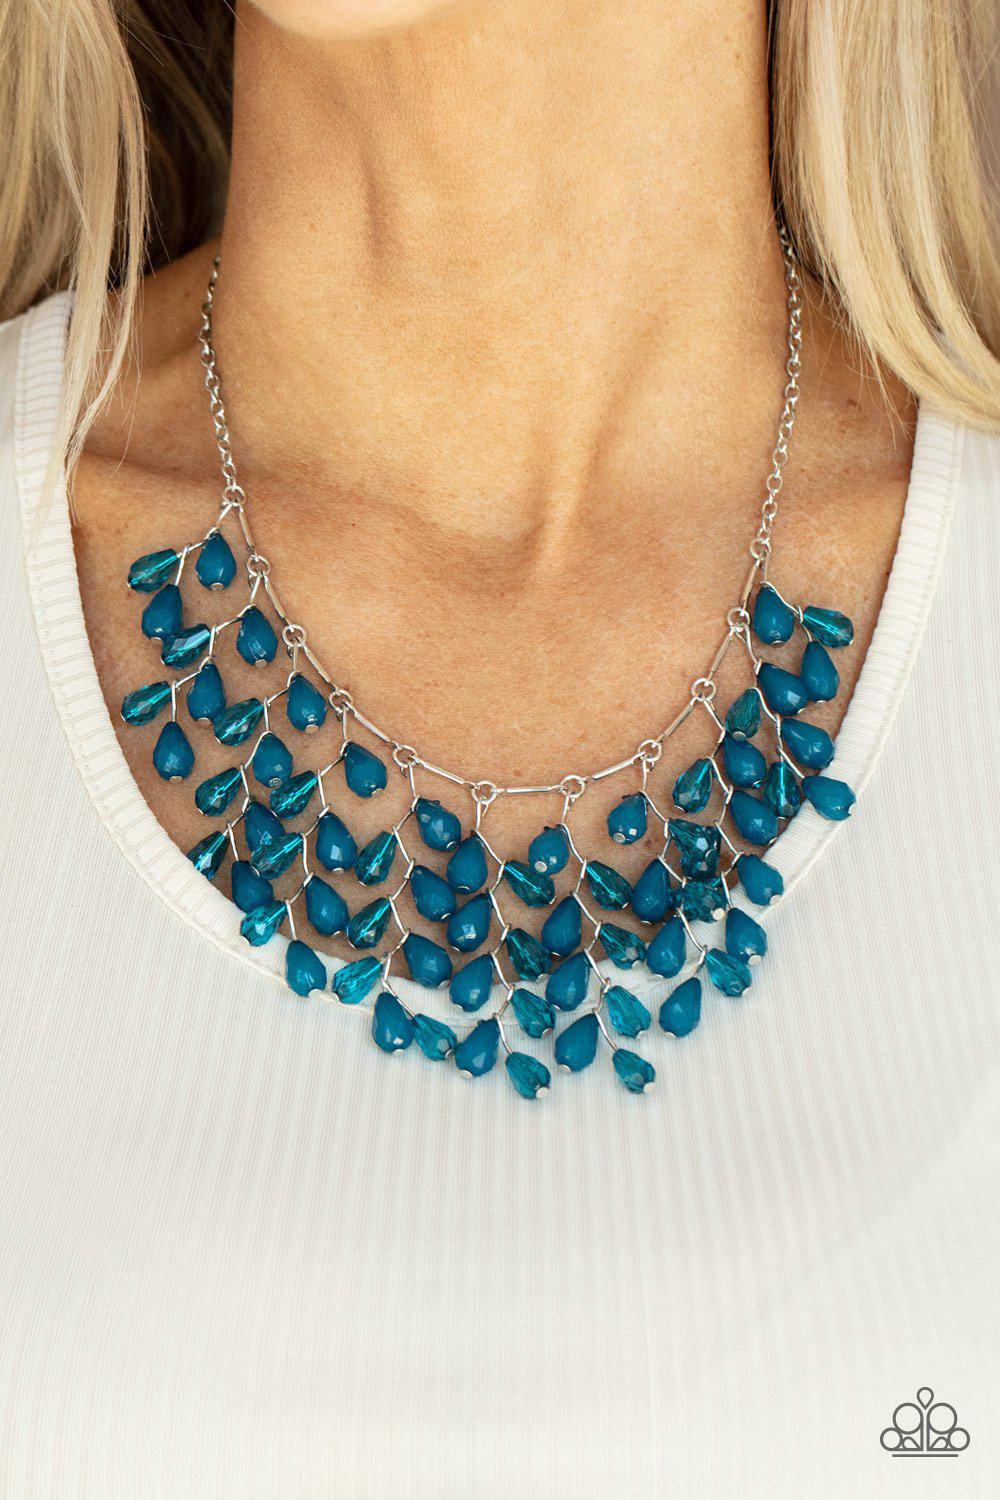 Garden Fairytale Blue and Silver Necklace - Paparazzi Accessories 2021 Convention Exclusive- model - CarasShop.com - $5 Jewelry by Cara Jewels